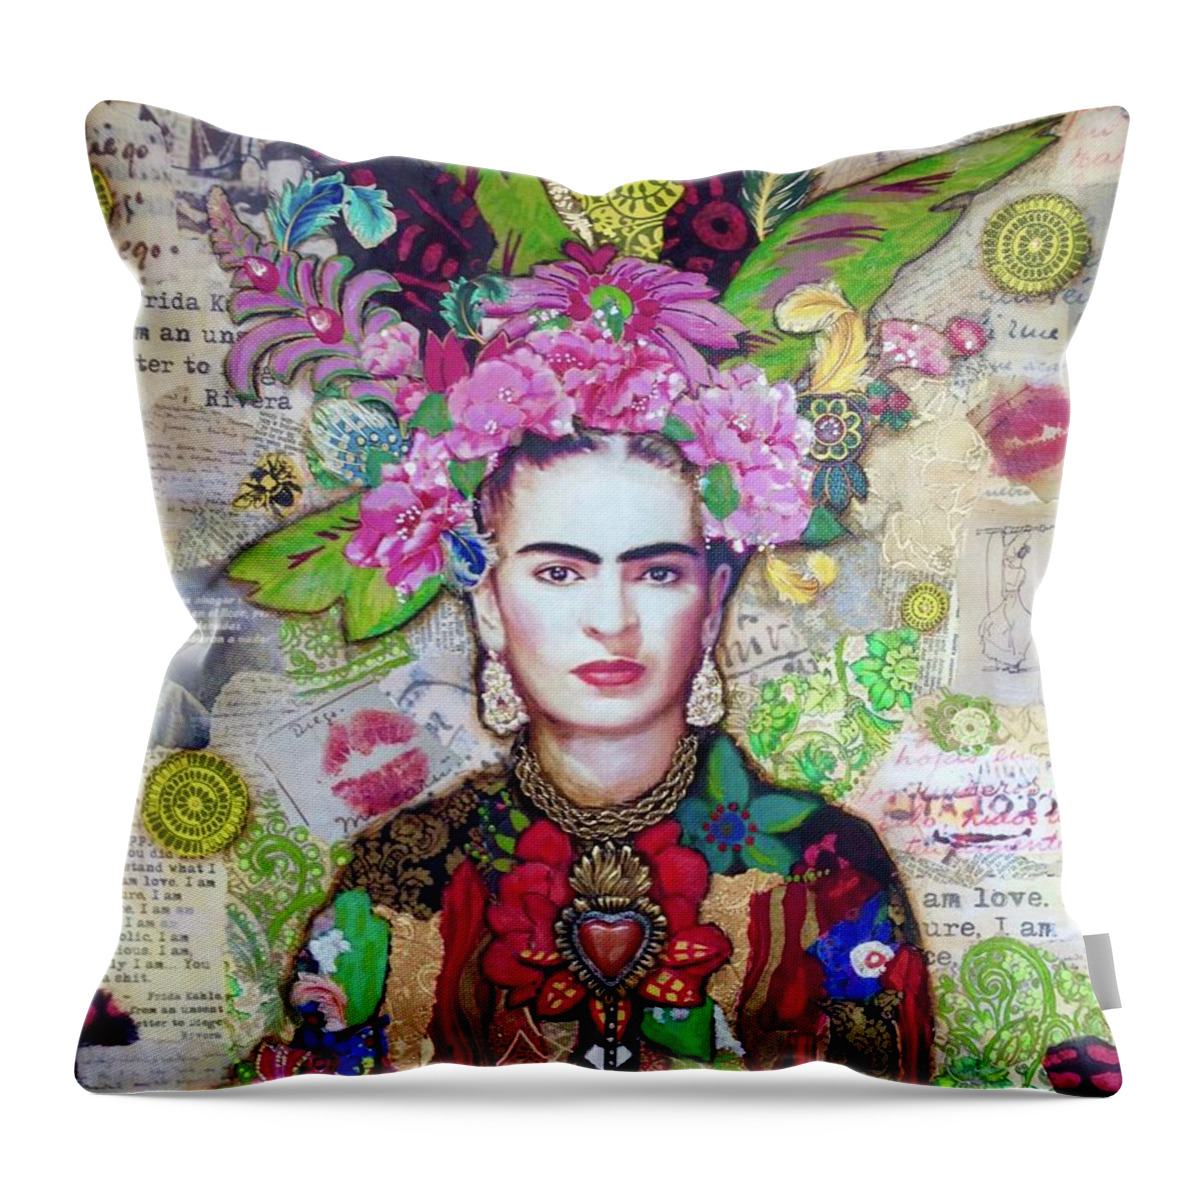 Frida Kahlo Throw Pillow featuring the mixed media Frida Kahlo by Carrie Eckert